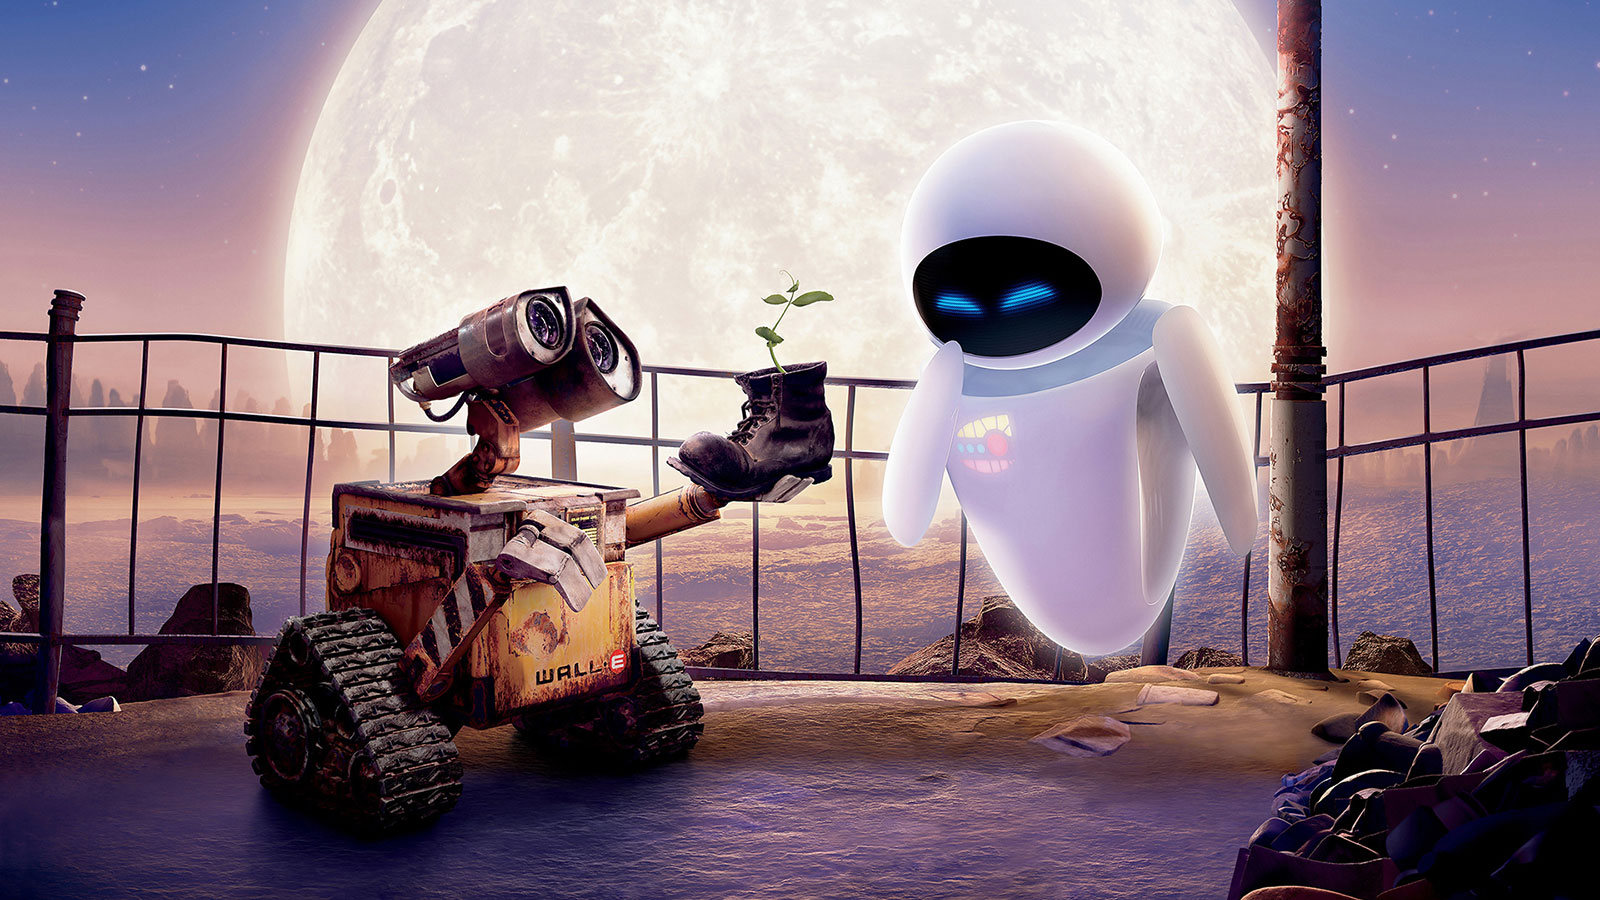 Decide If These Pixar Movies Are Overrated or Underrated and We’ll Guess Your Generation WALL E